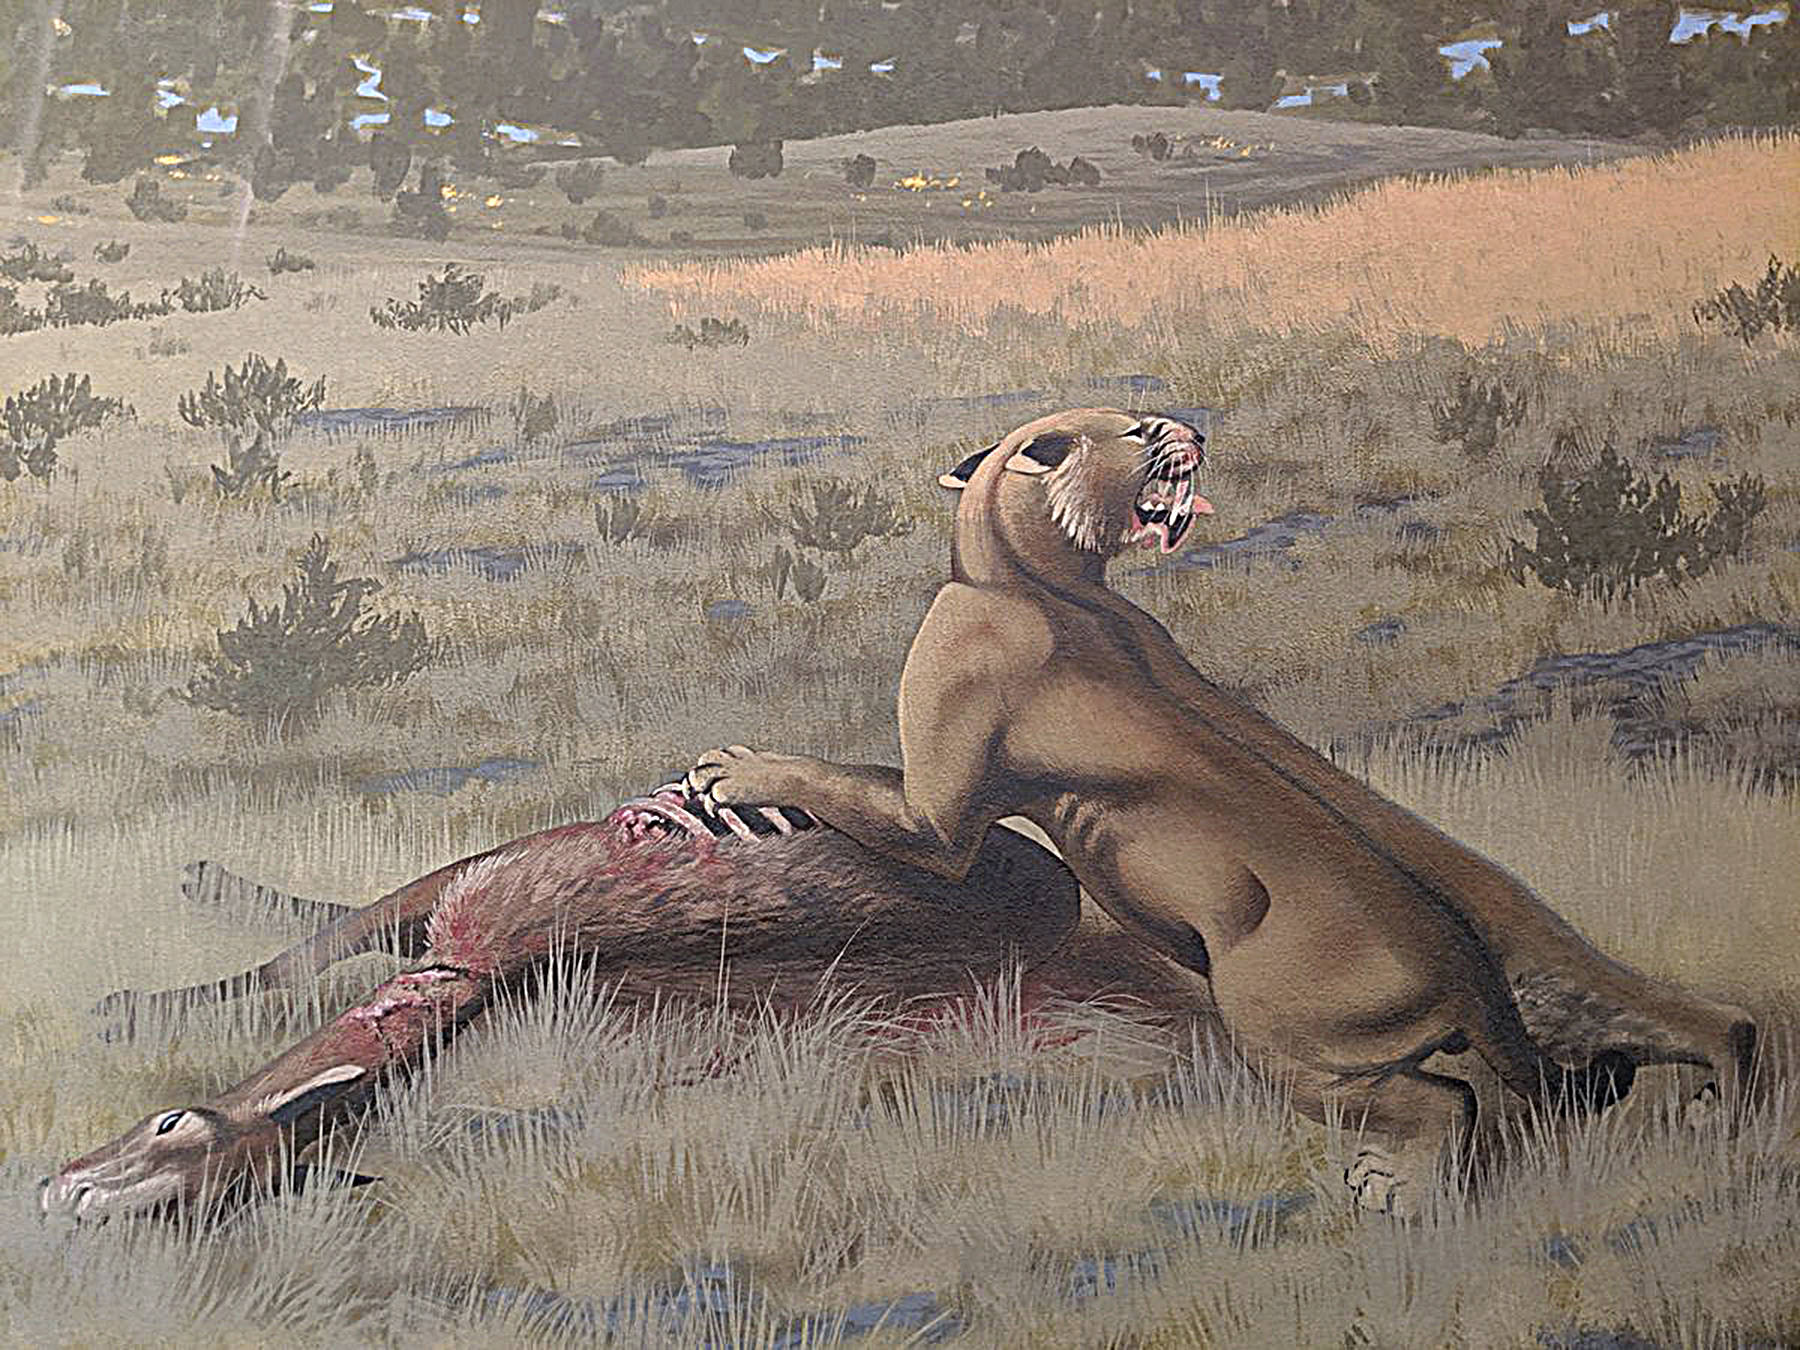 Image courtesy of Ohio State Univ.
An artist’s depiction of Machairodus lahayishupup eating Hemiauchenia, a camel relative. The image is part of a mural of the Rattlesnake Formation of central Oregon, where fossils of the species have been found. The mural is exhibited at John Day Fossil Beds National Monument, part of the National Park Service.